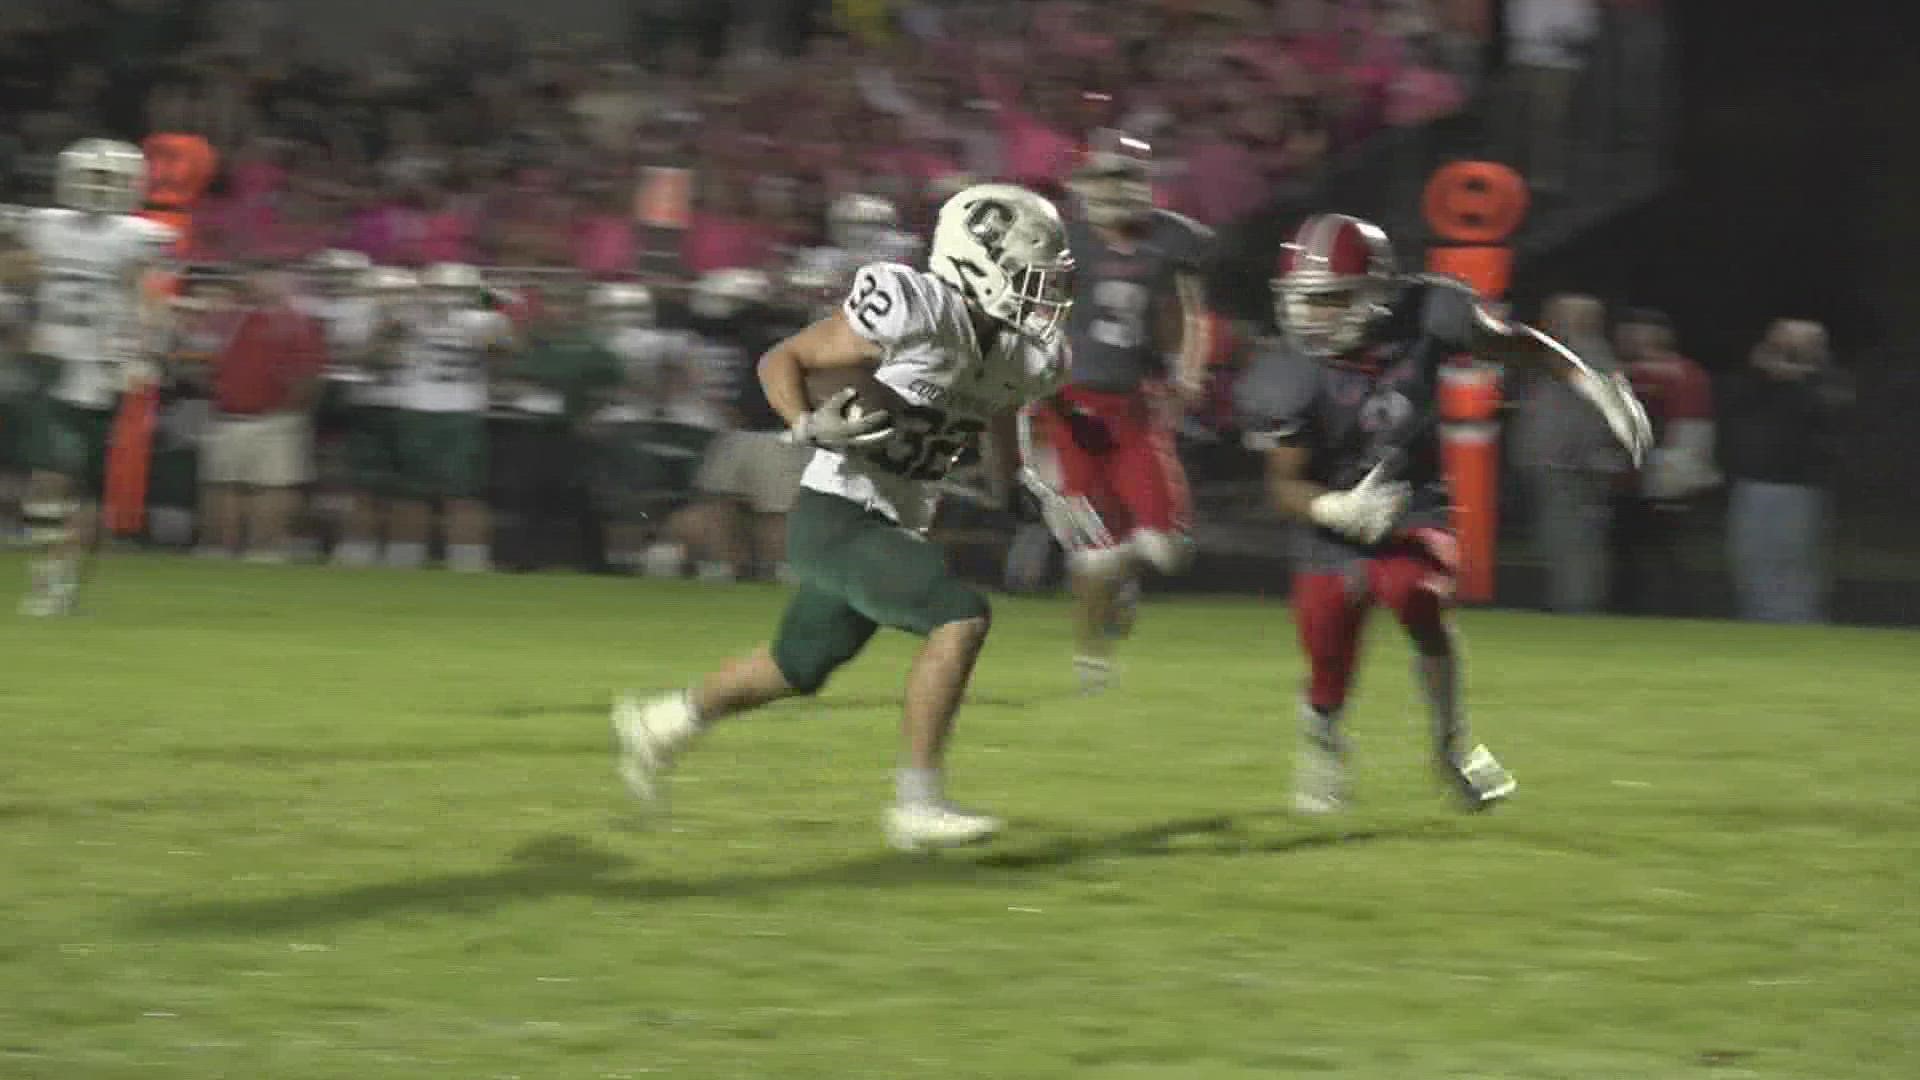 Spring Lake wins 27-20 and they're 6-and-1 heading into next week's trip to West Catholic.